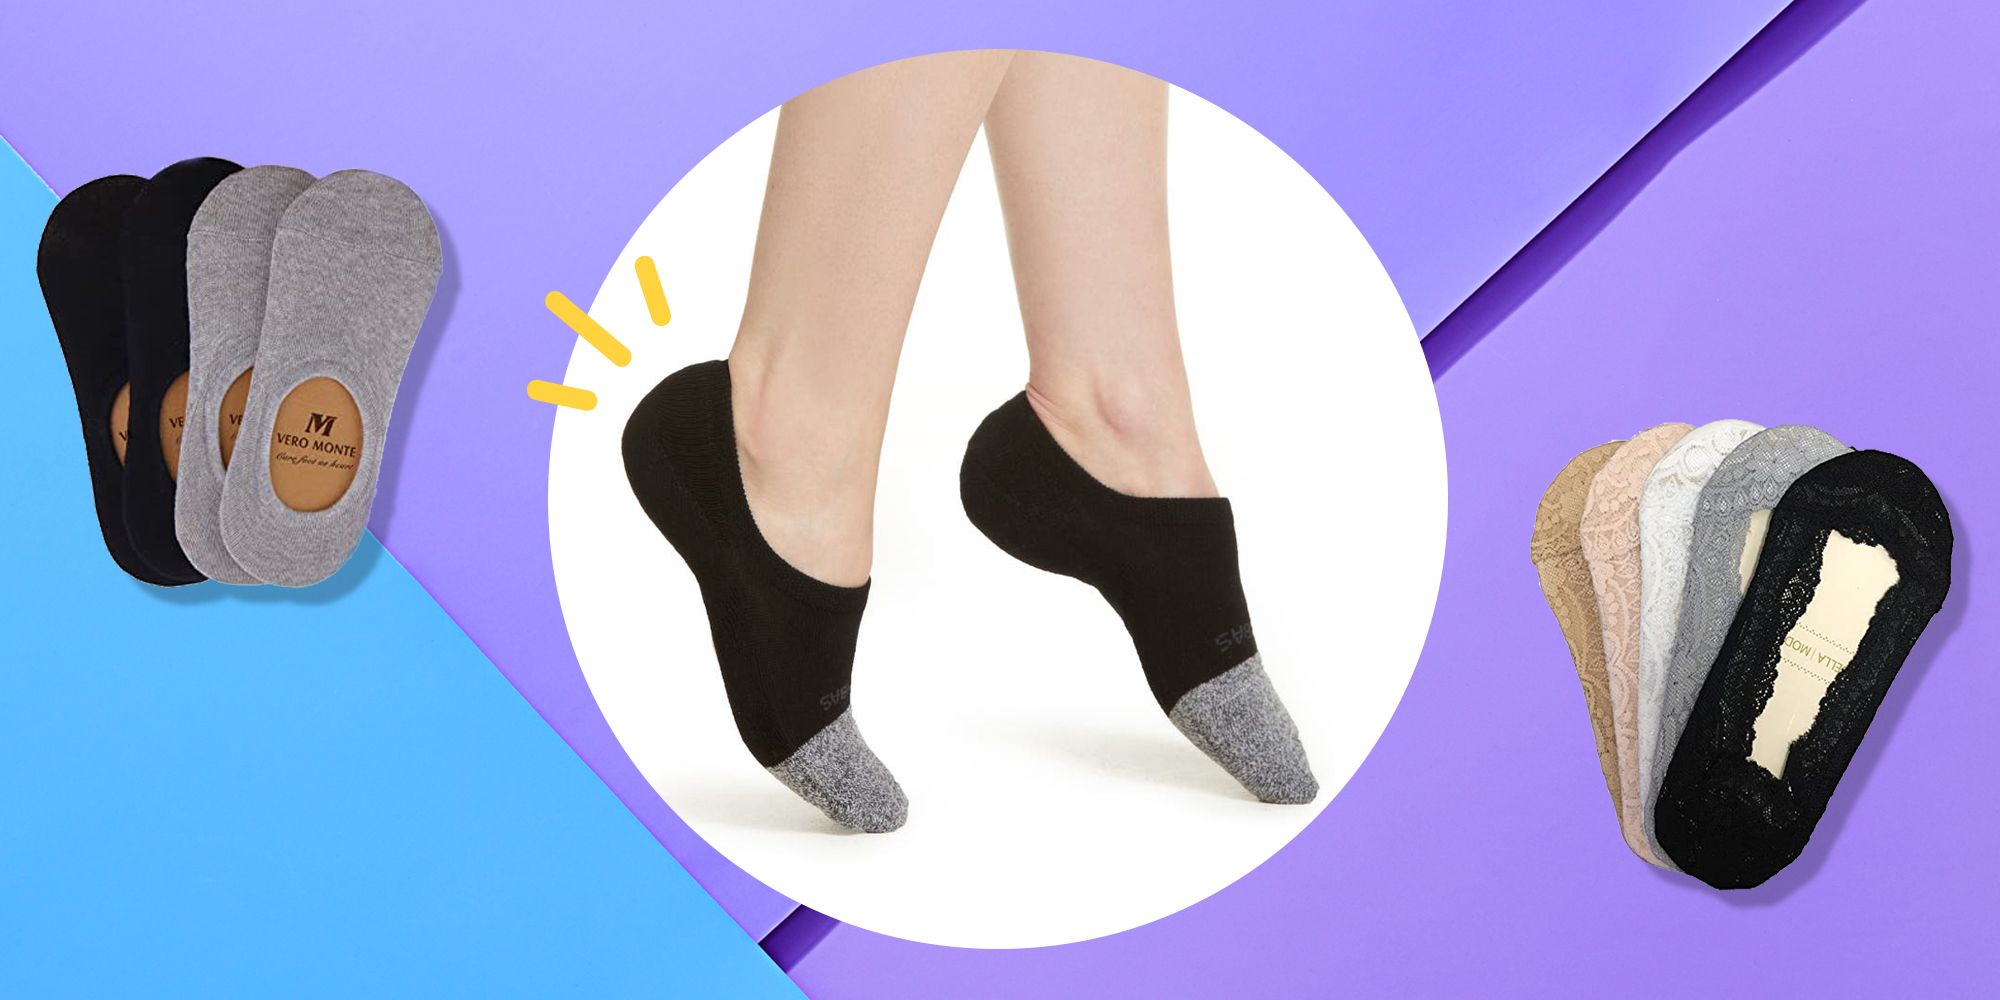 8 Pairs no show socks for women size 6-9 Ultra Low Cut socks for flats liner socks Hidden Invisible for Boat Loafer Summer